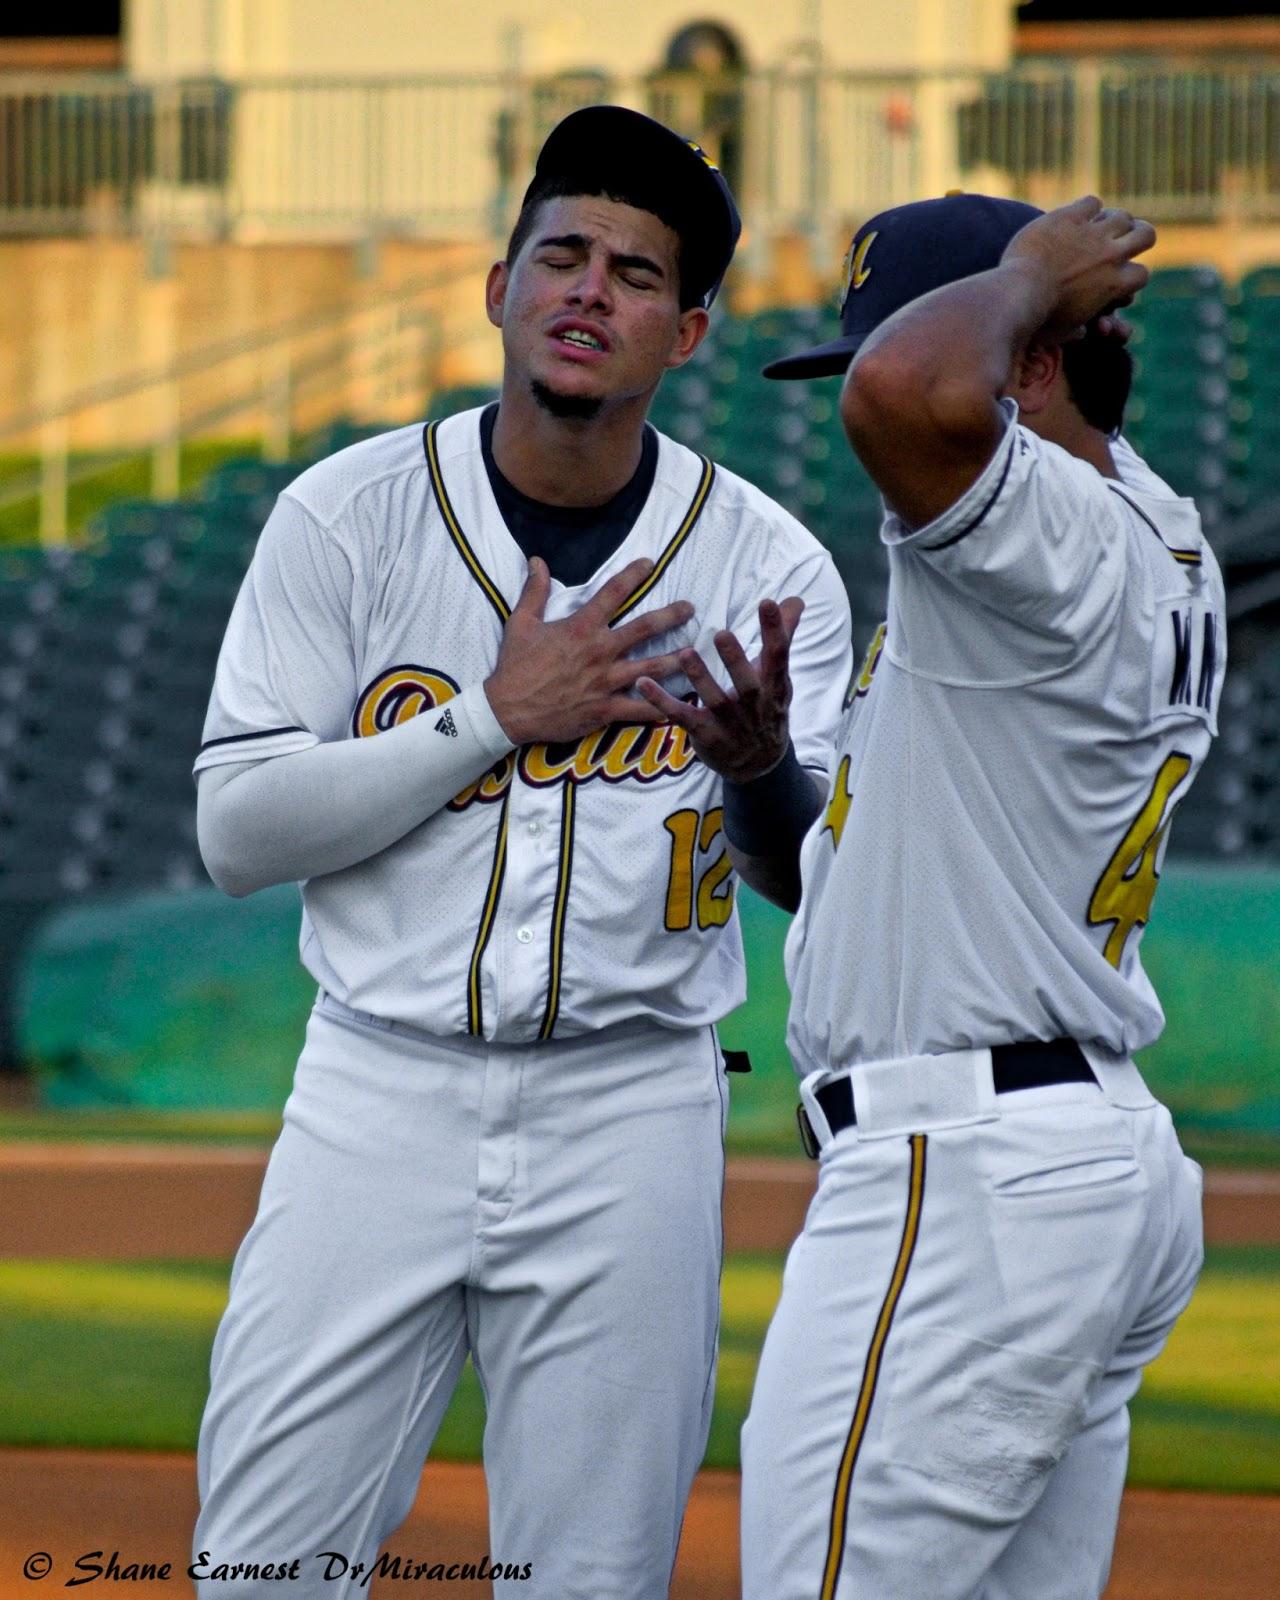 The Montgomery Baseball Blog: Willy Adames Plays Serious